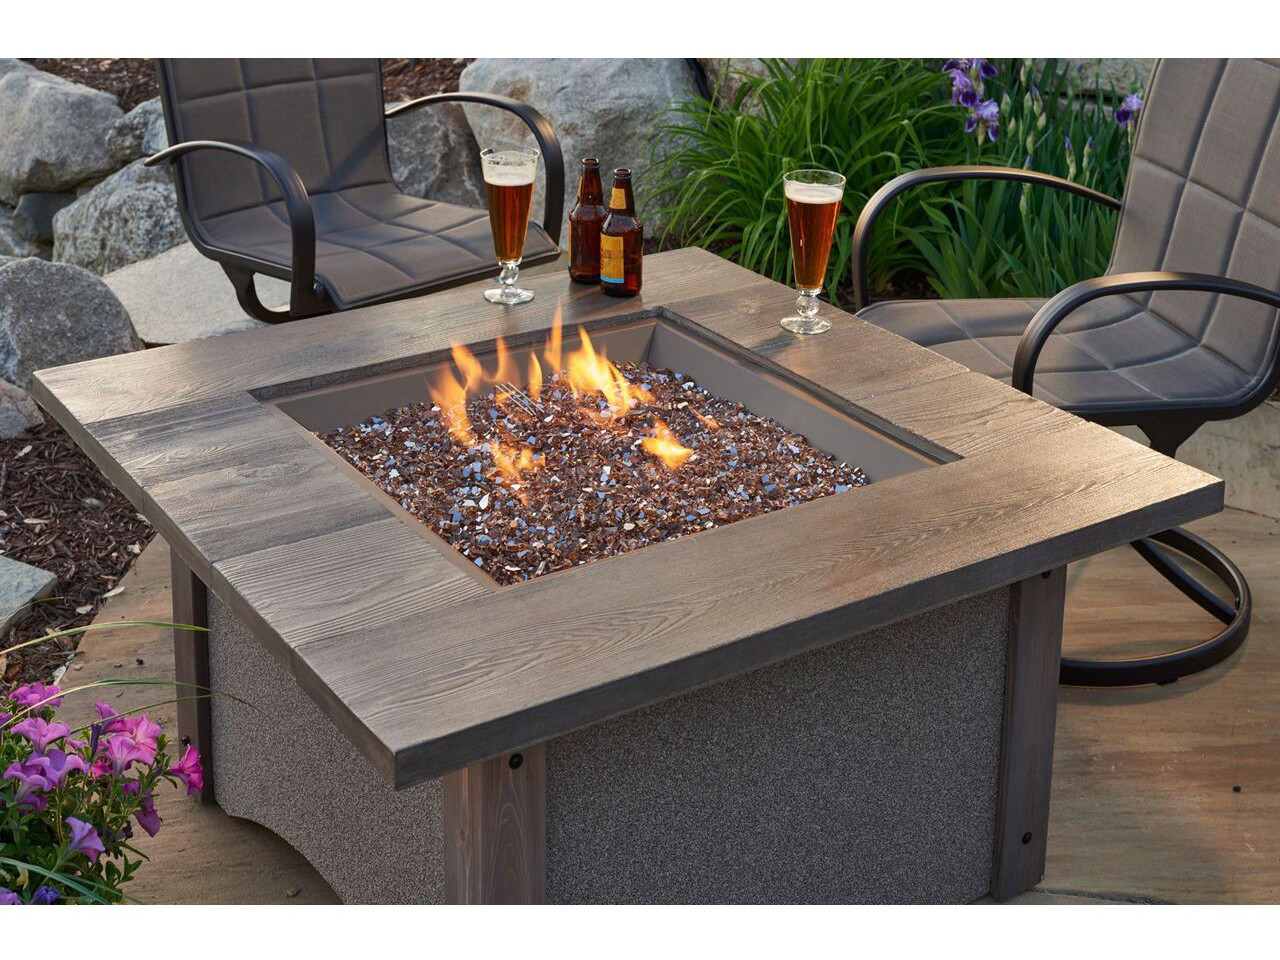 Outdoor Fire Pit Table
 Outdoor GreatRoom Pine Ridge Square Fire Pit Table with